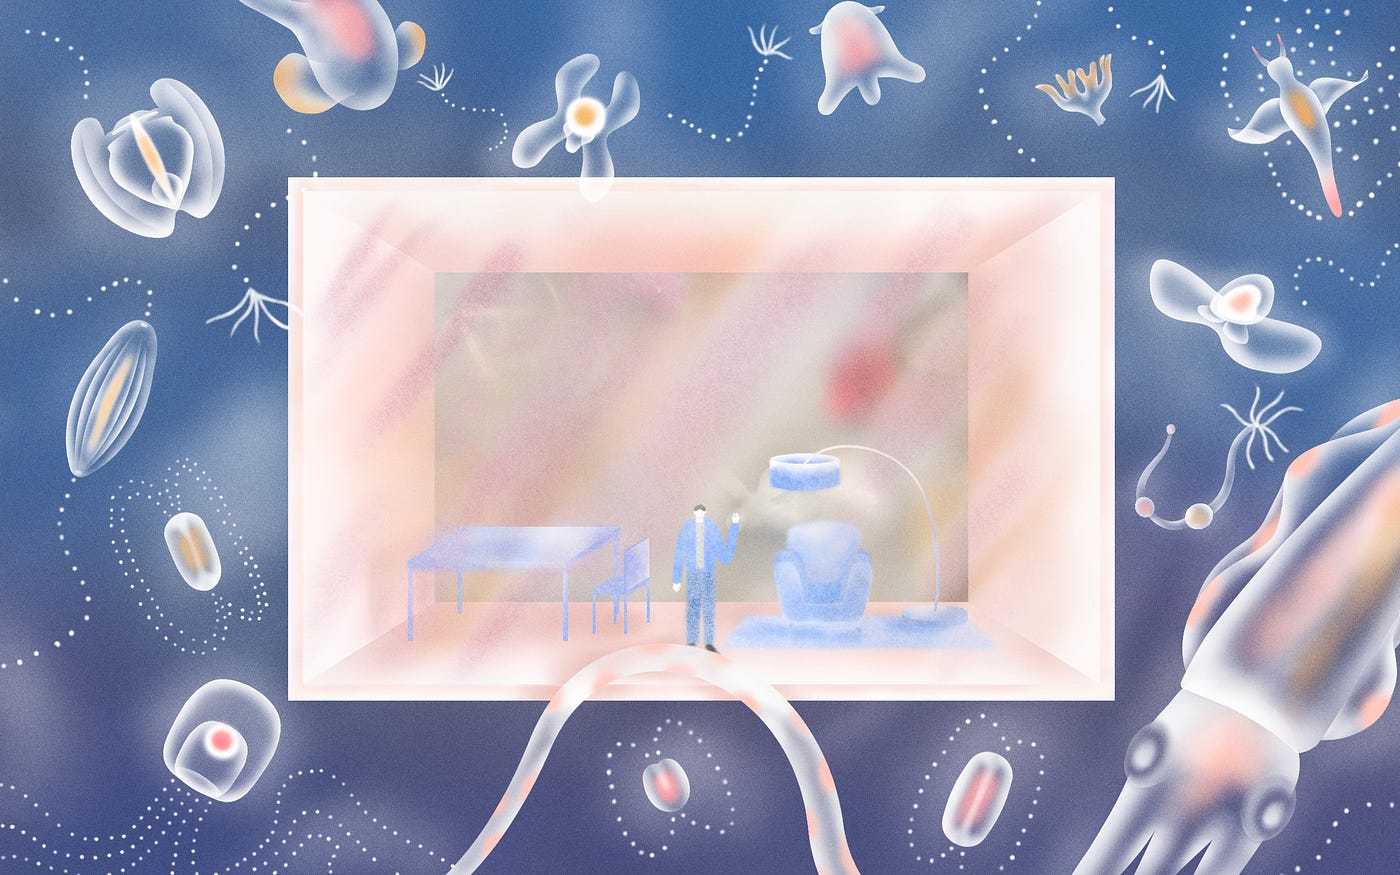 Illustration of a person’s home ecosystem in a sealed-off rectangle in a sea of particles and squid.